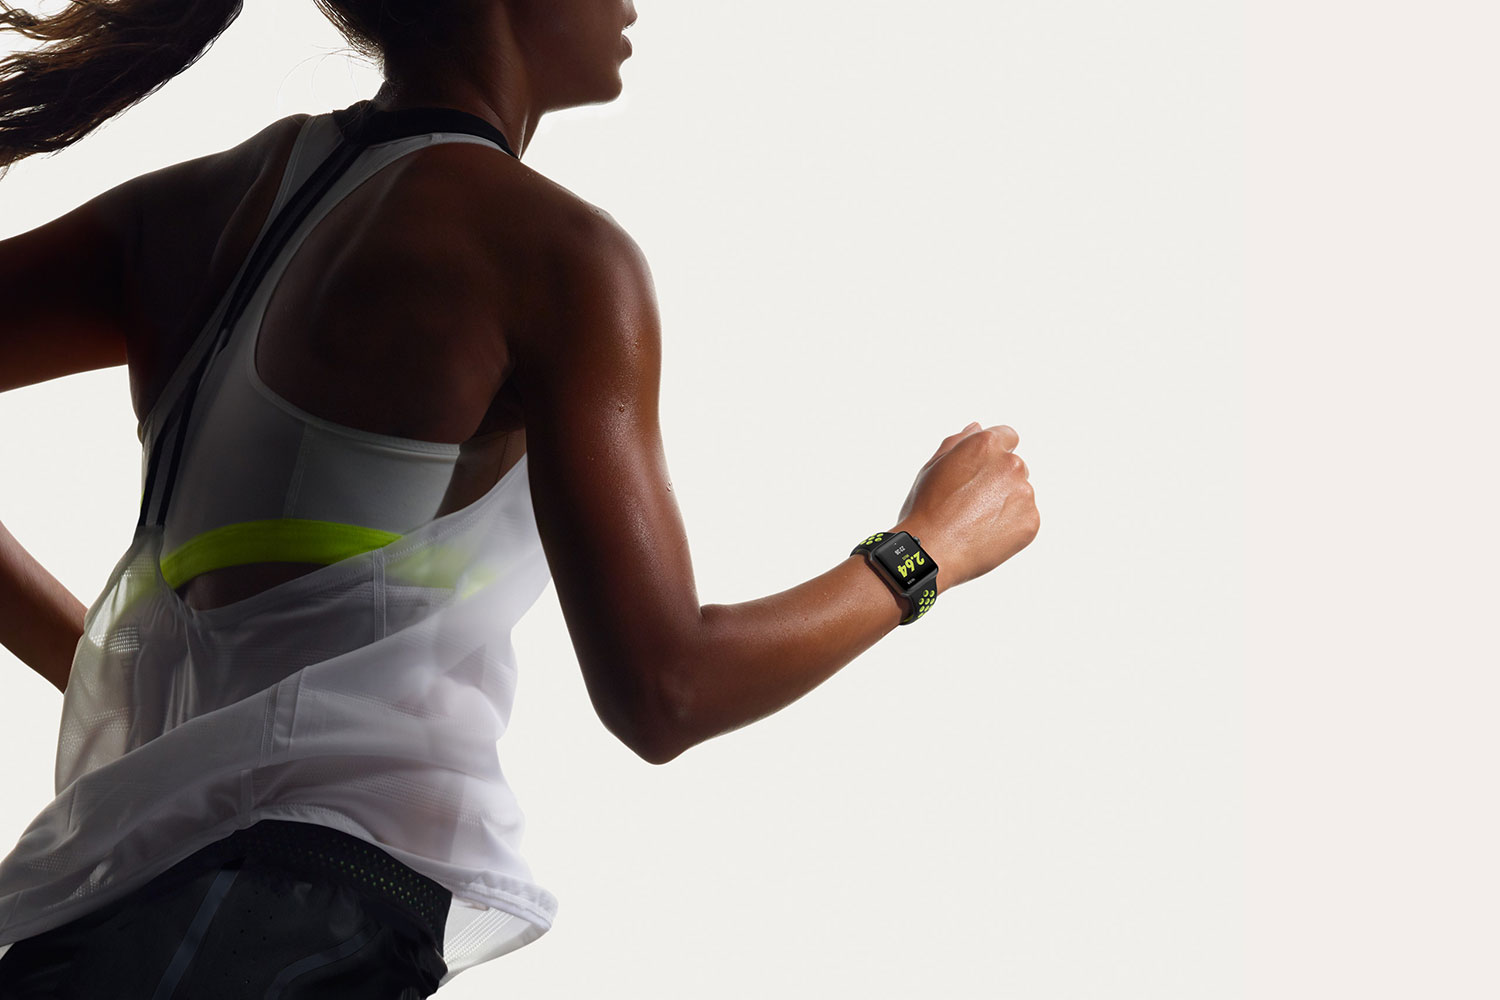 Runkeeper uses Apple Watch GPS to keep track of your route